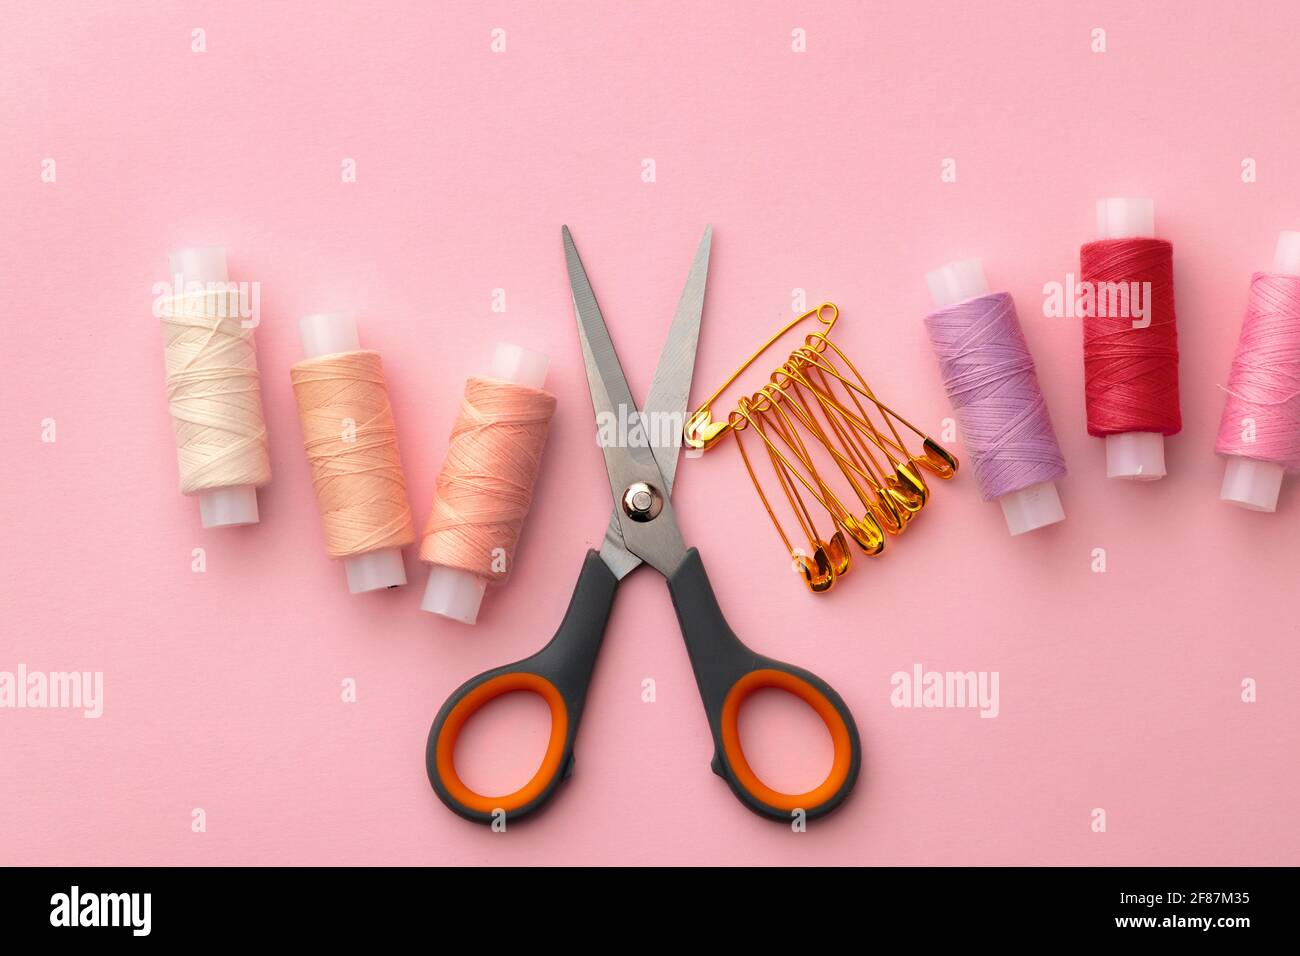 Sewing accessories including thread spools and pins on pink background Stock Photo